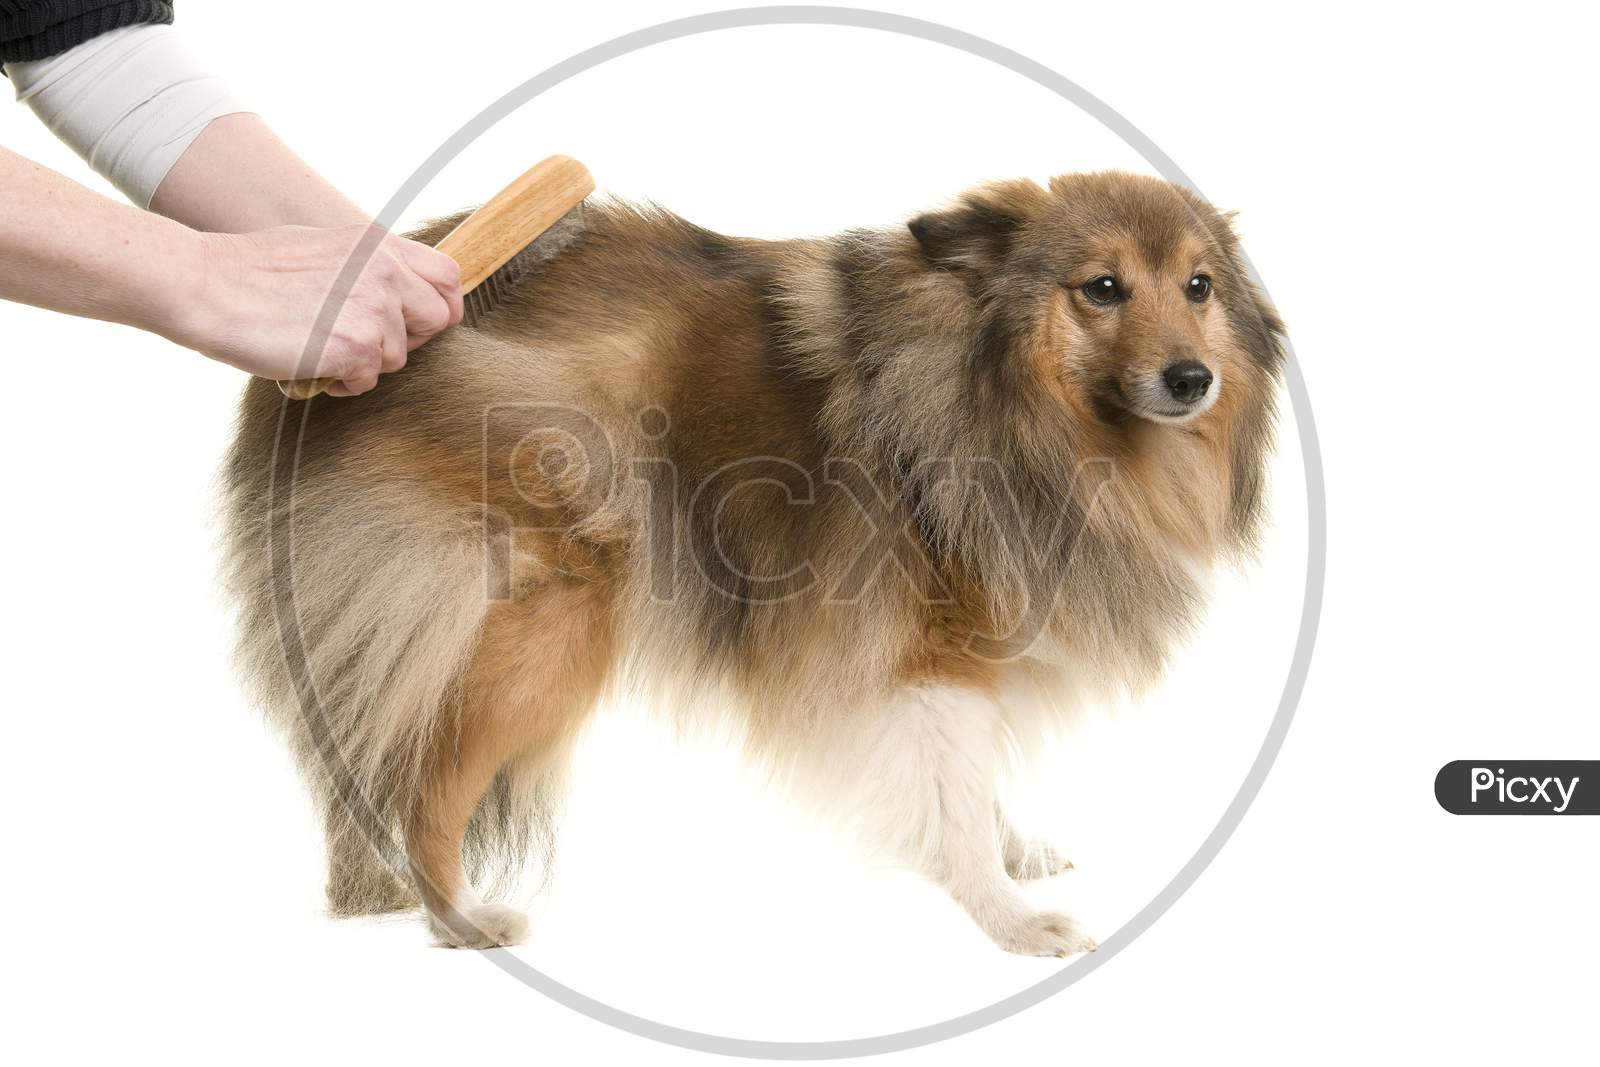 Longhaired Dog Being Groomed Or Combed Isolated On A White Background